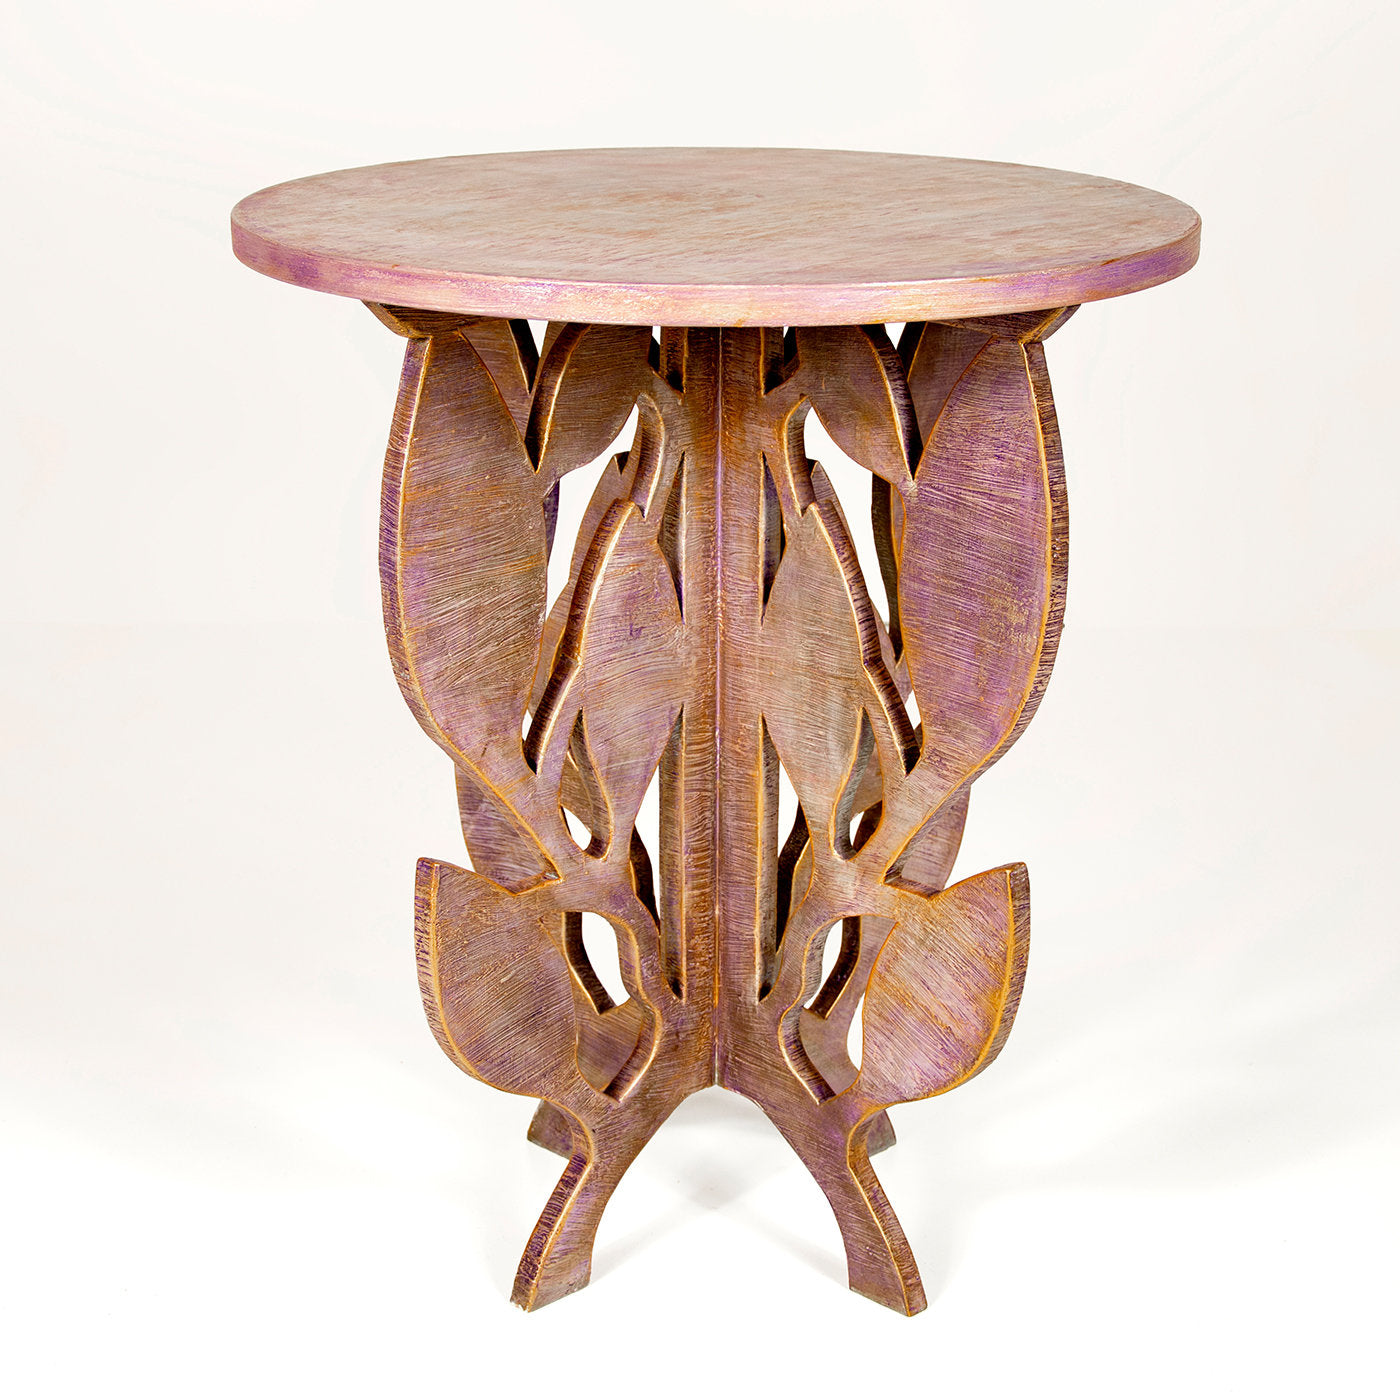 Ramy Wood Side Table by Giannella Ventura - Alternative view 2